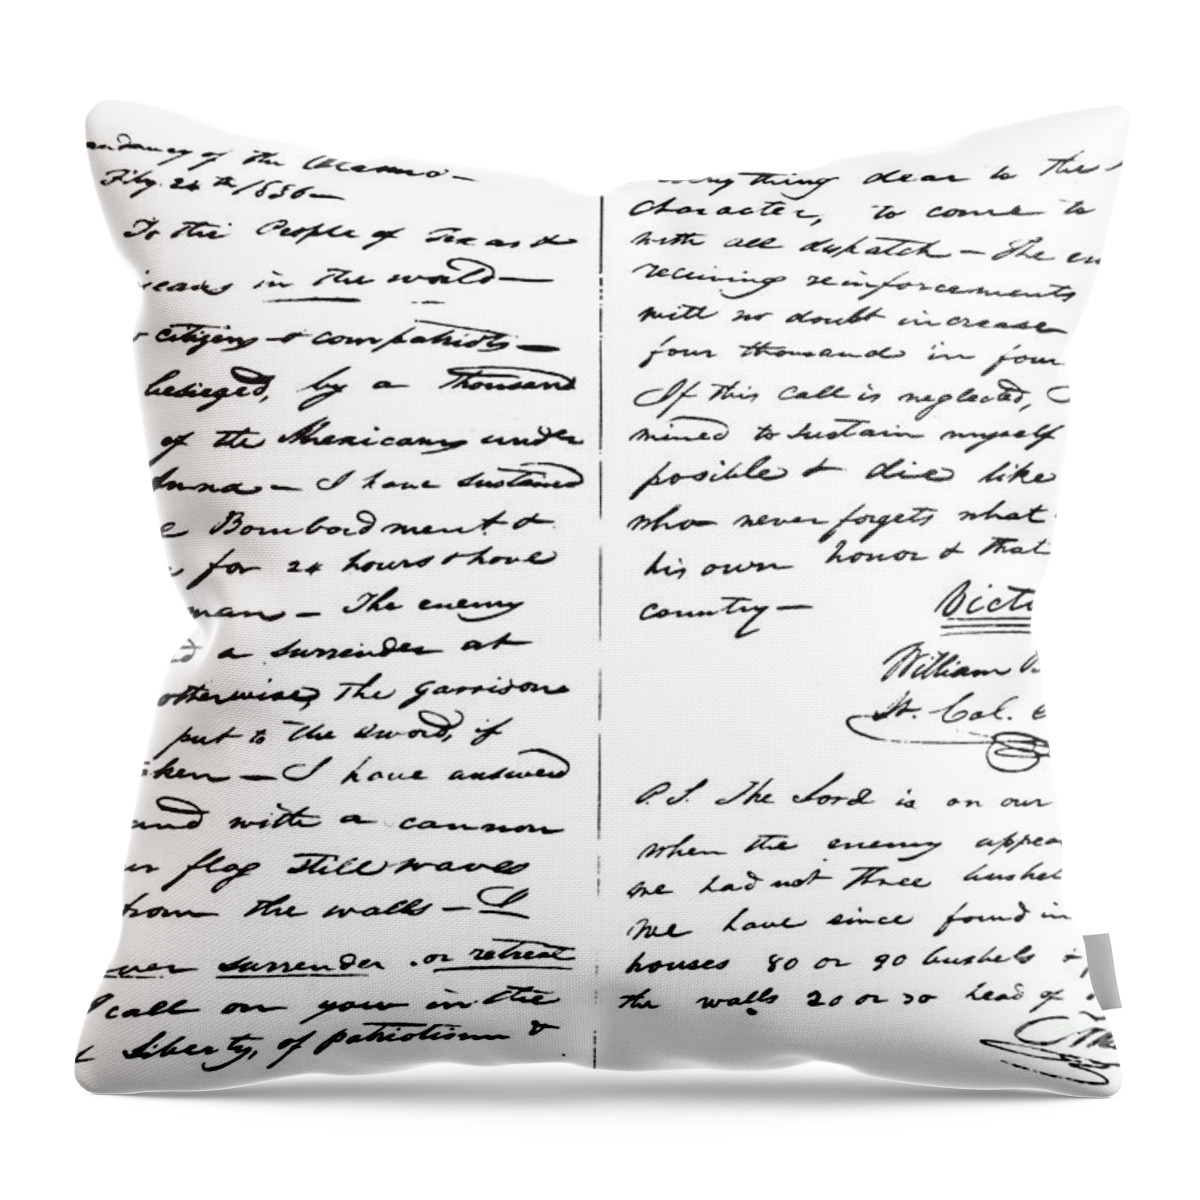 William Barret Travis Throw Pillow featuring the drawing The Victory of Death letter written by the Alamo commander William Barret Travis, 1836 by William Barret Travis